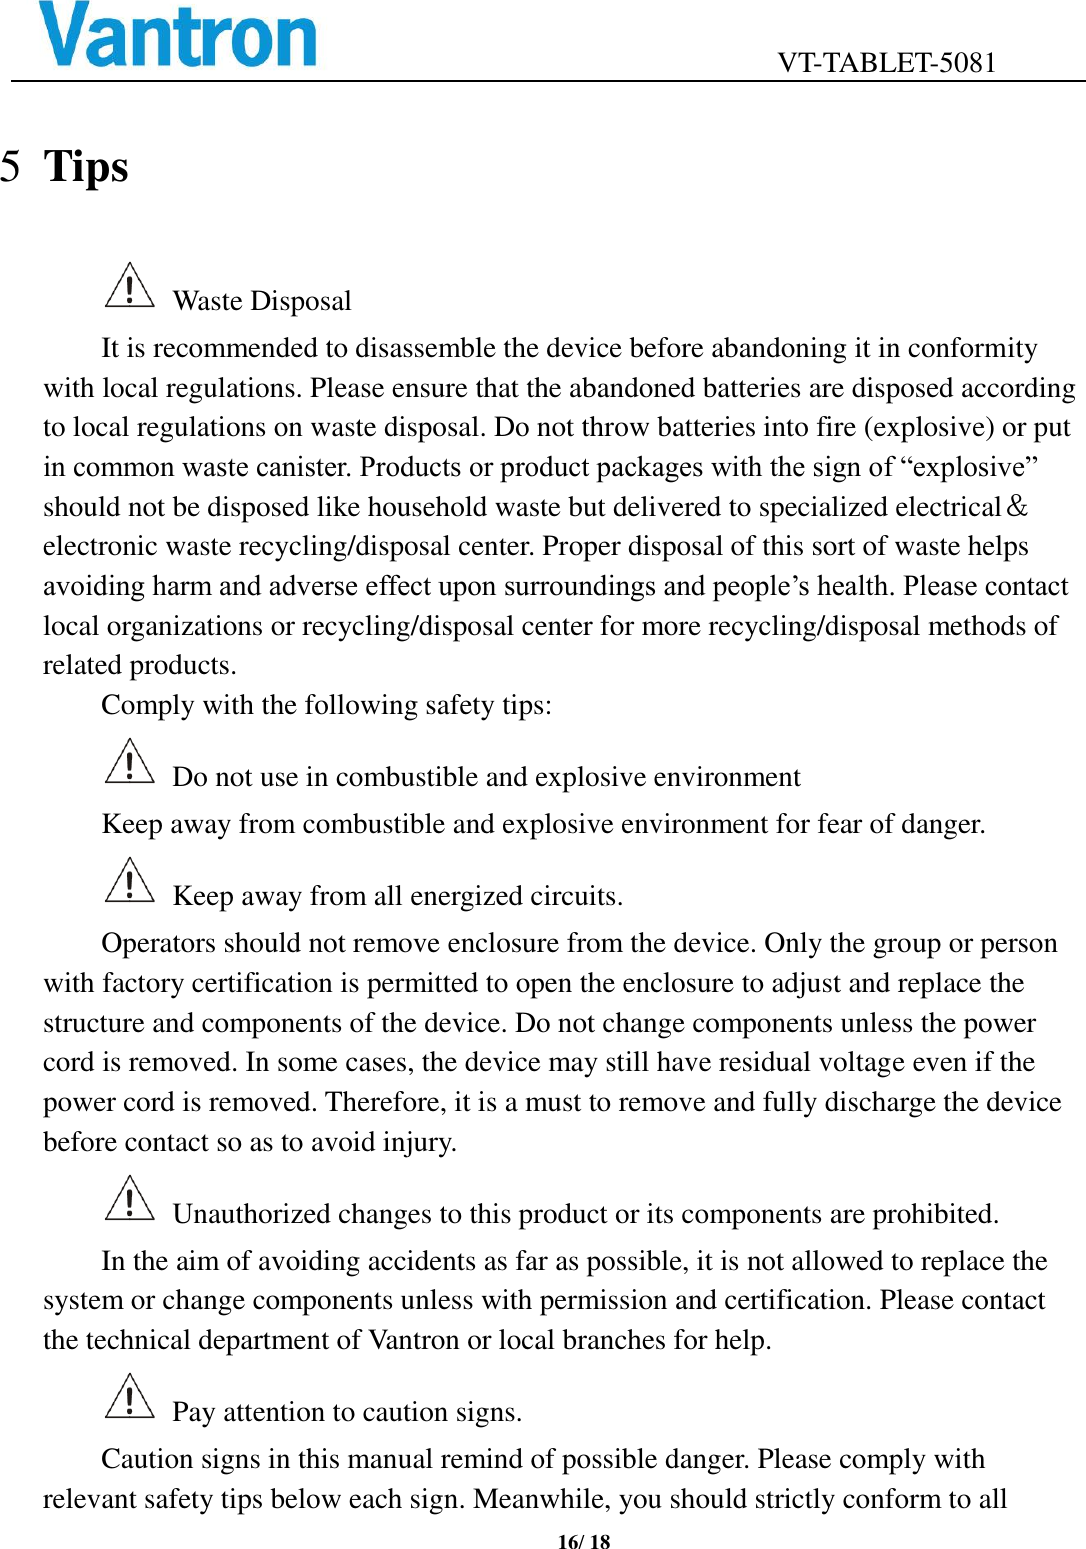 Page 16 of Chengdu Vantron Technology VTTABLET-5081 Tablet Computer User Manual